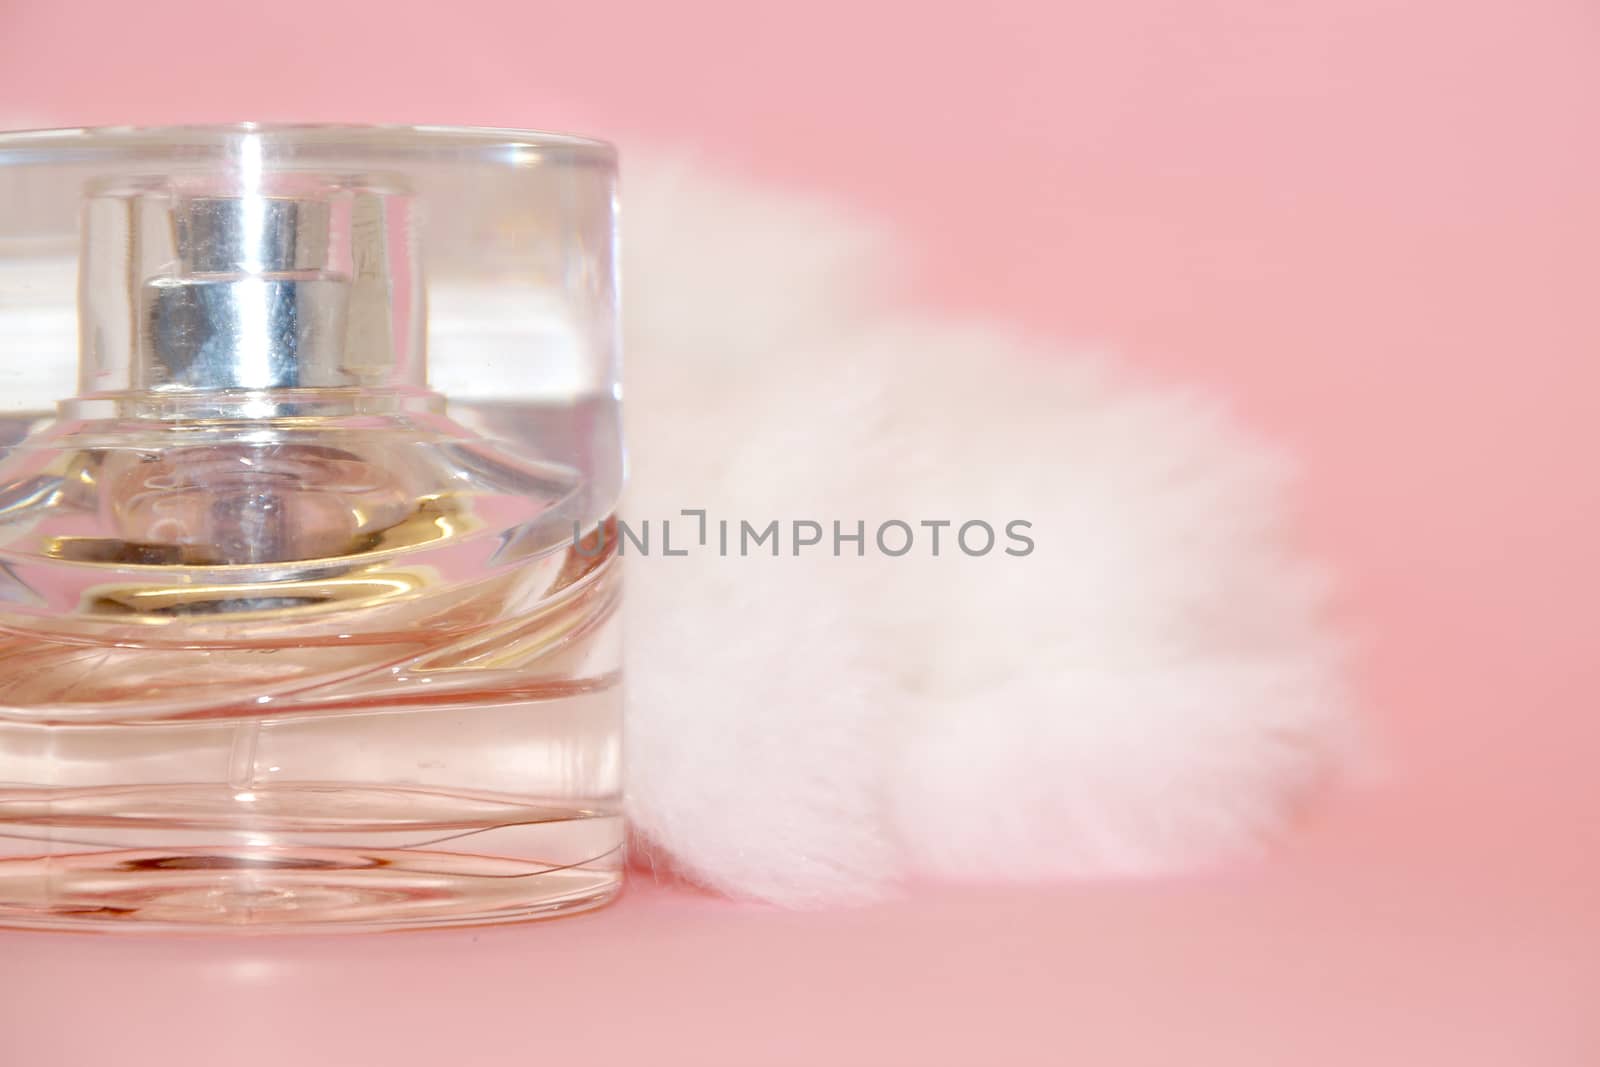 perfume bottle and white fur on a pink background by Annado